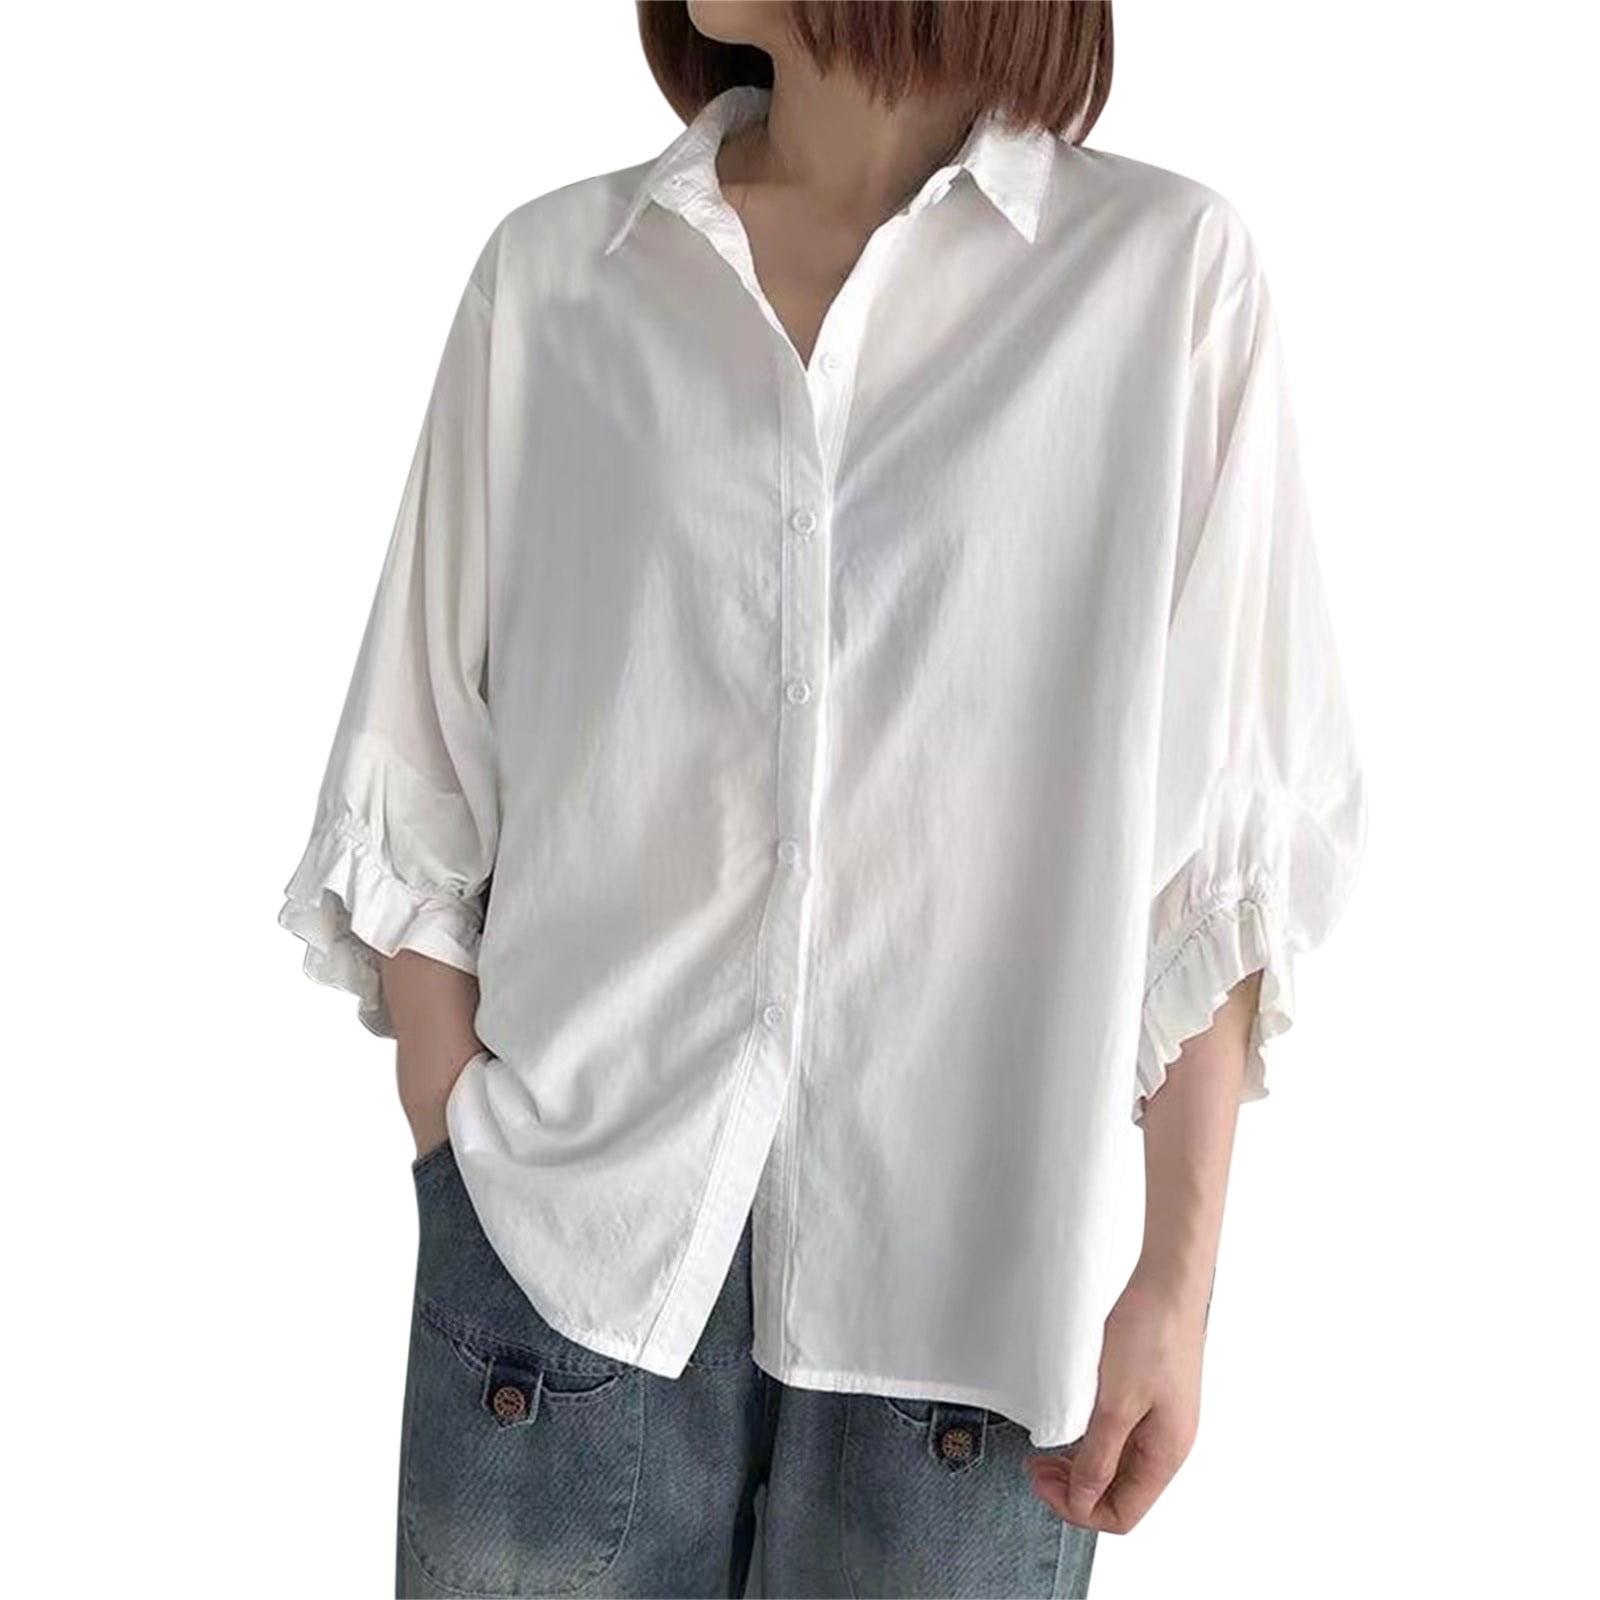 XINSHIDE Female Shirts Solid Button Shirt Blouses 3/4 Sleeve Casual ...